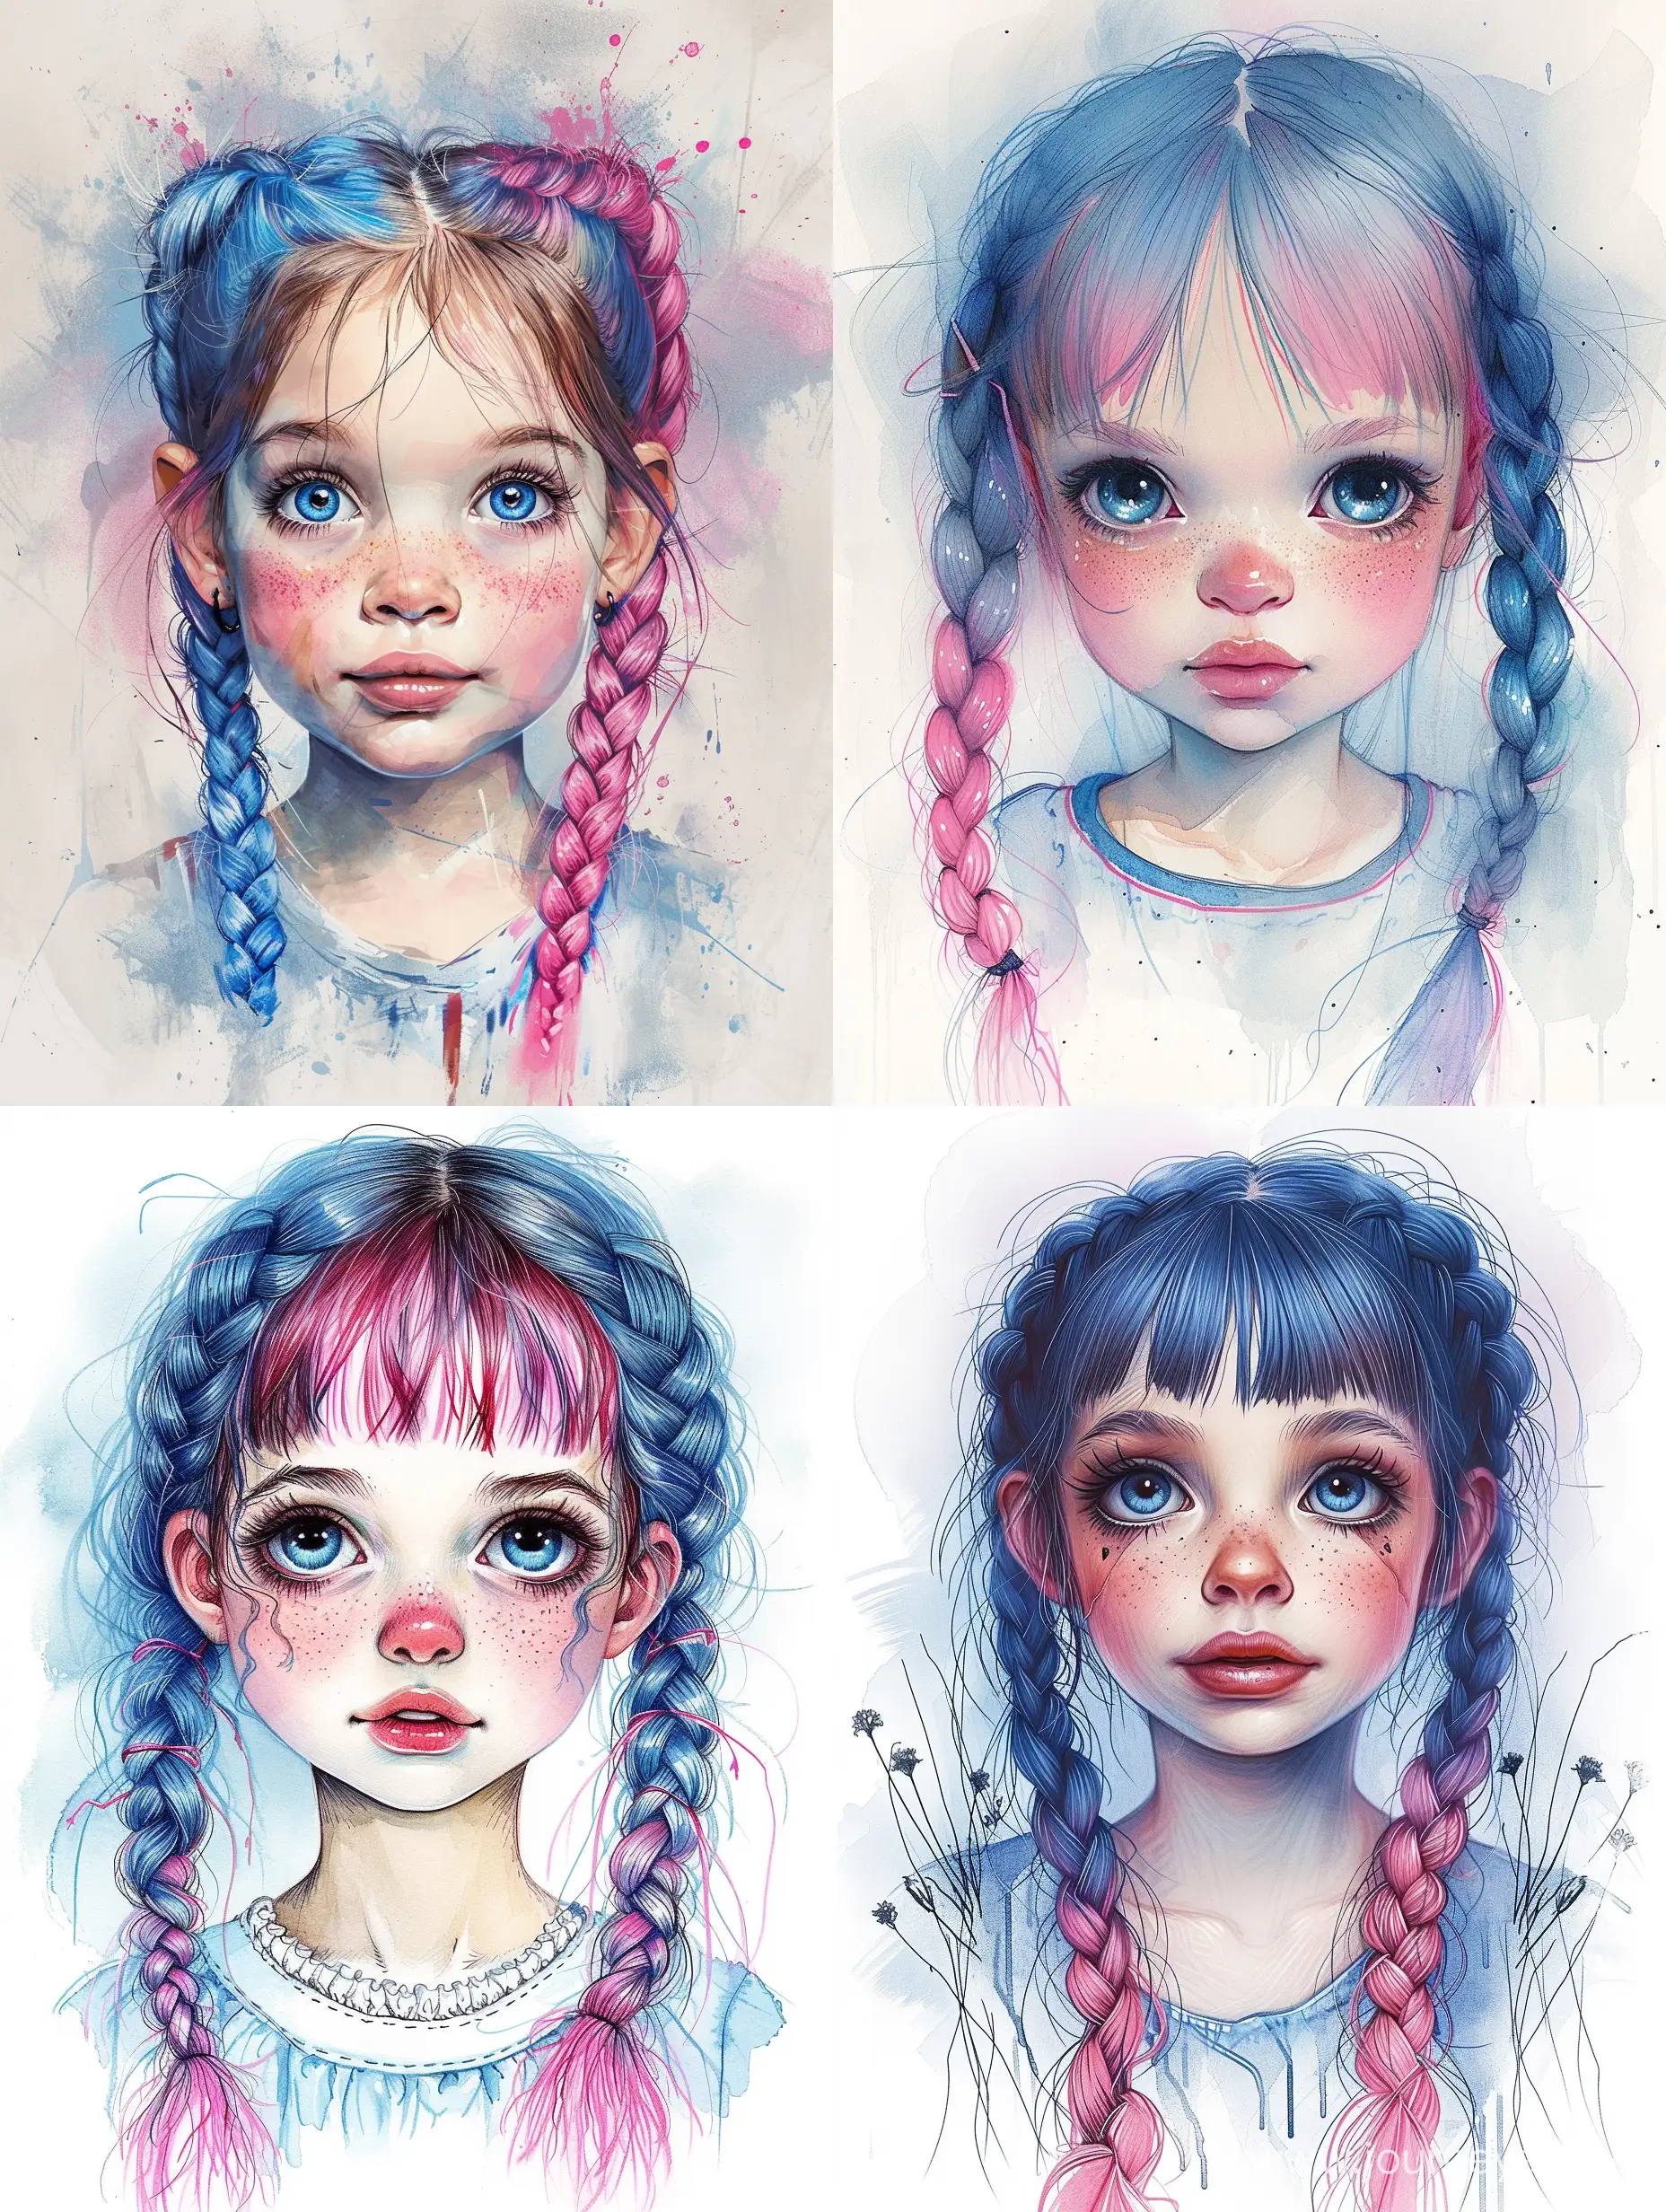 Adorable-FiveYearOld-Girl-with-Braided-Blue-and-Pink-Hair-Whimsical-Watercolor-Drawing